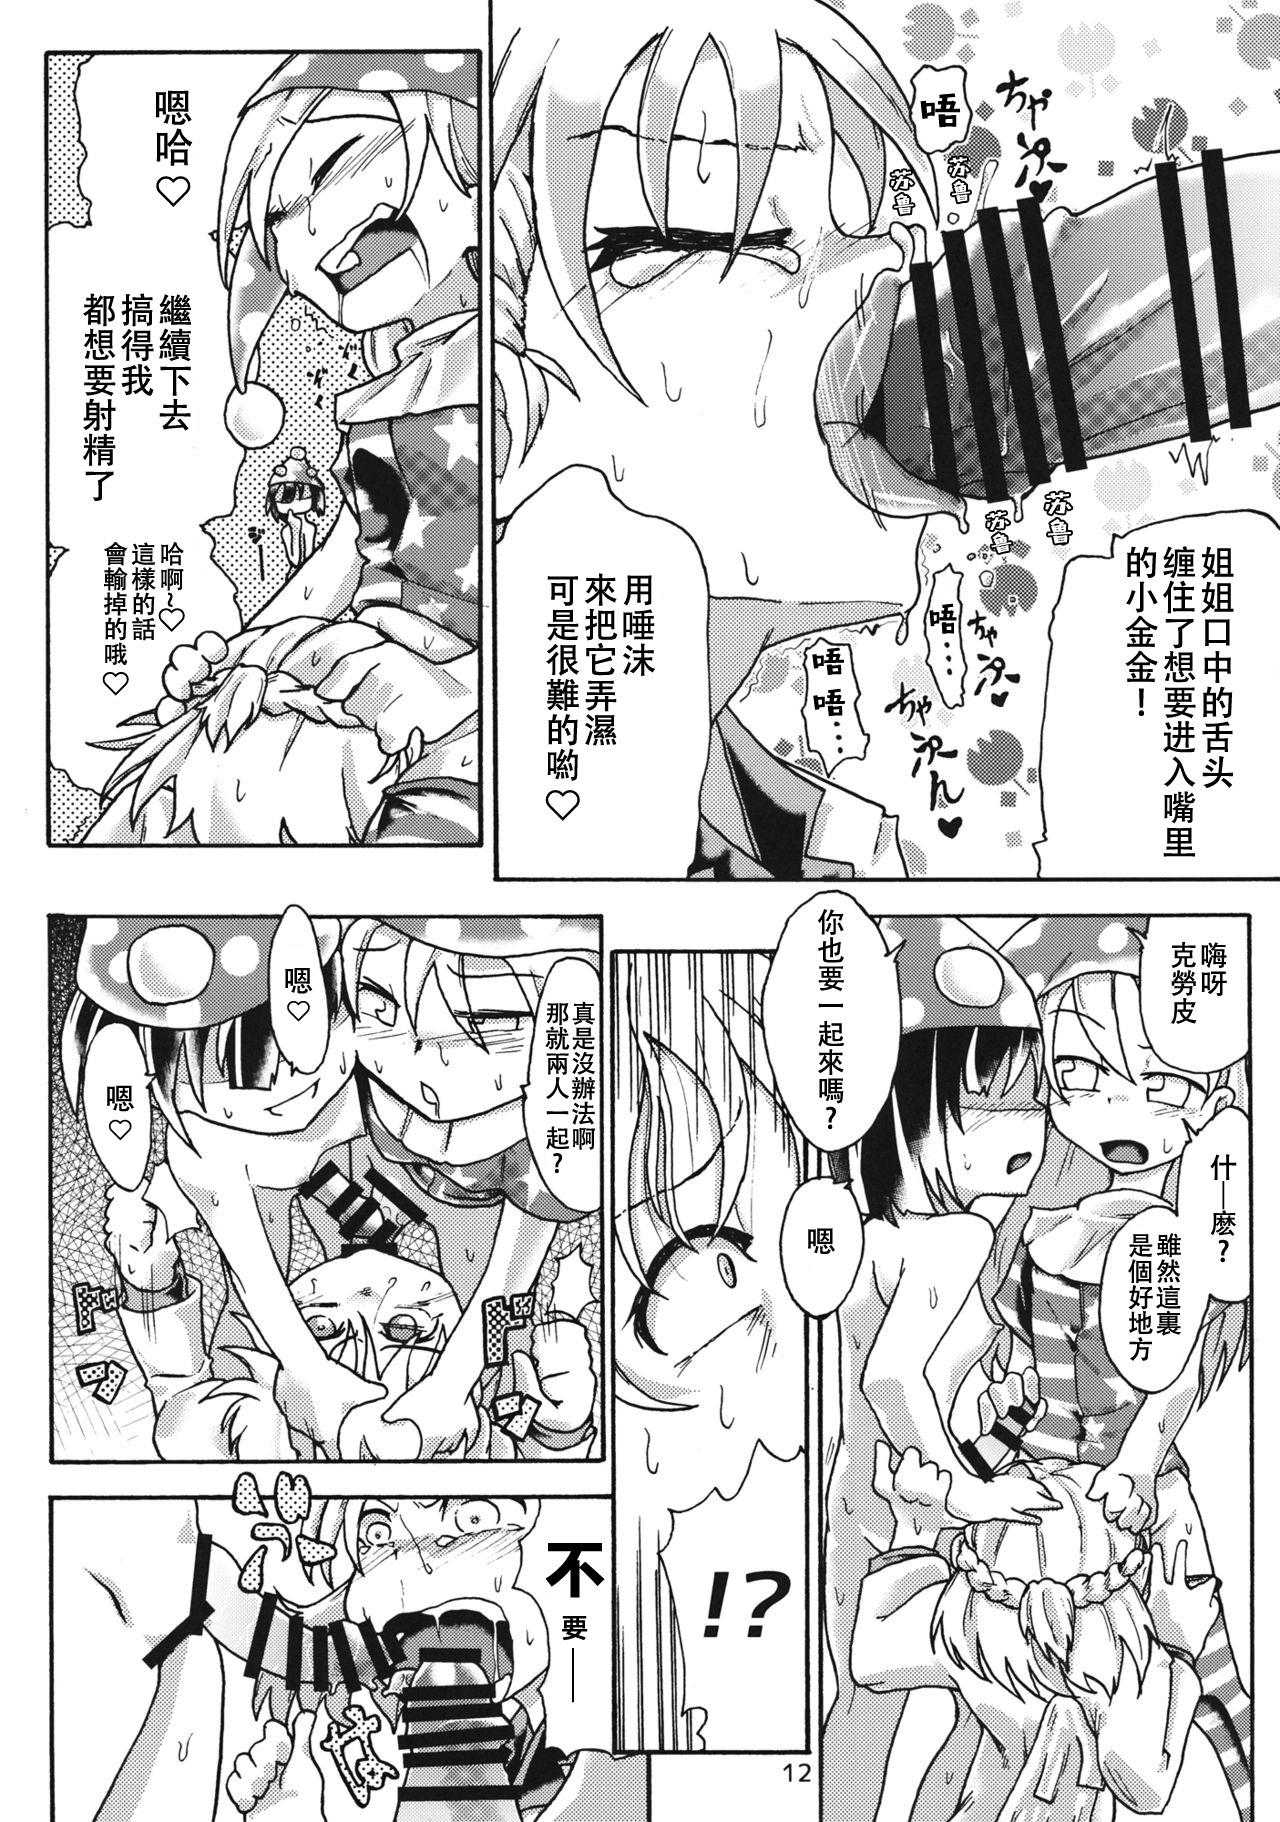 Foot Creeping! - Touhou project Hot Whores - Page 11